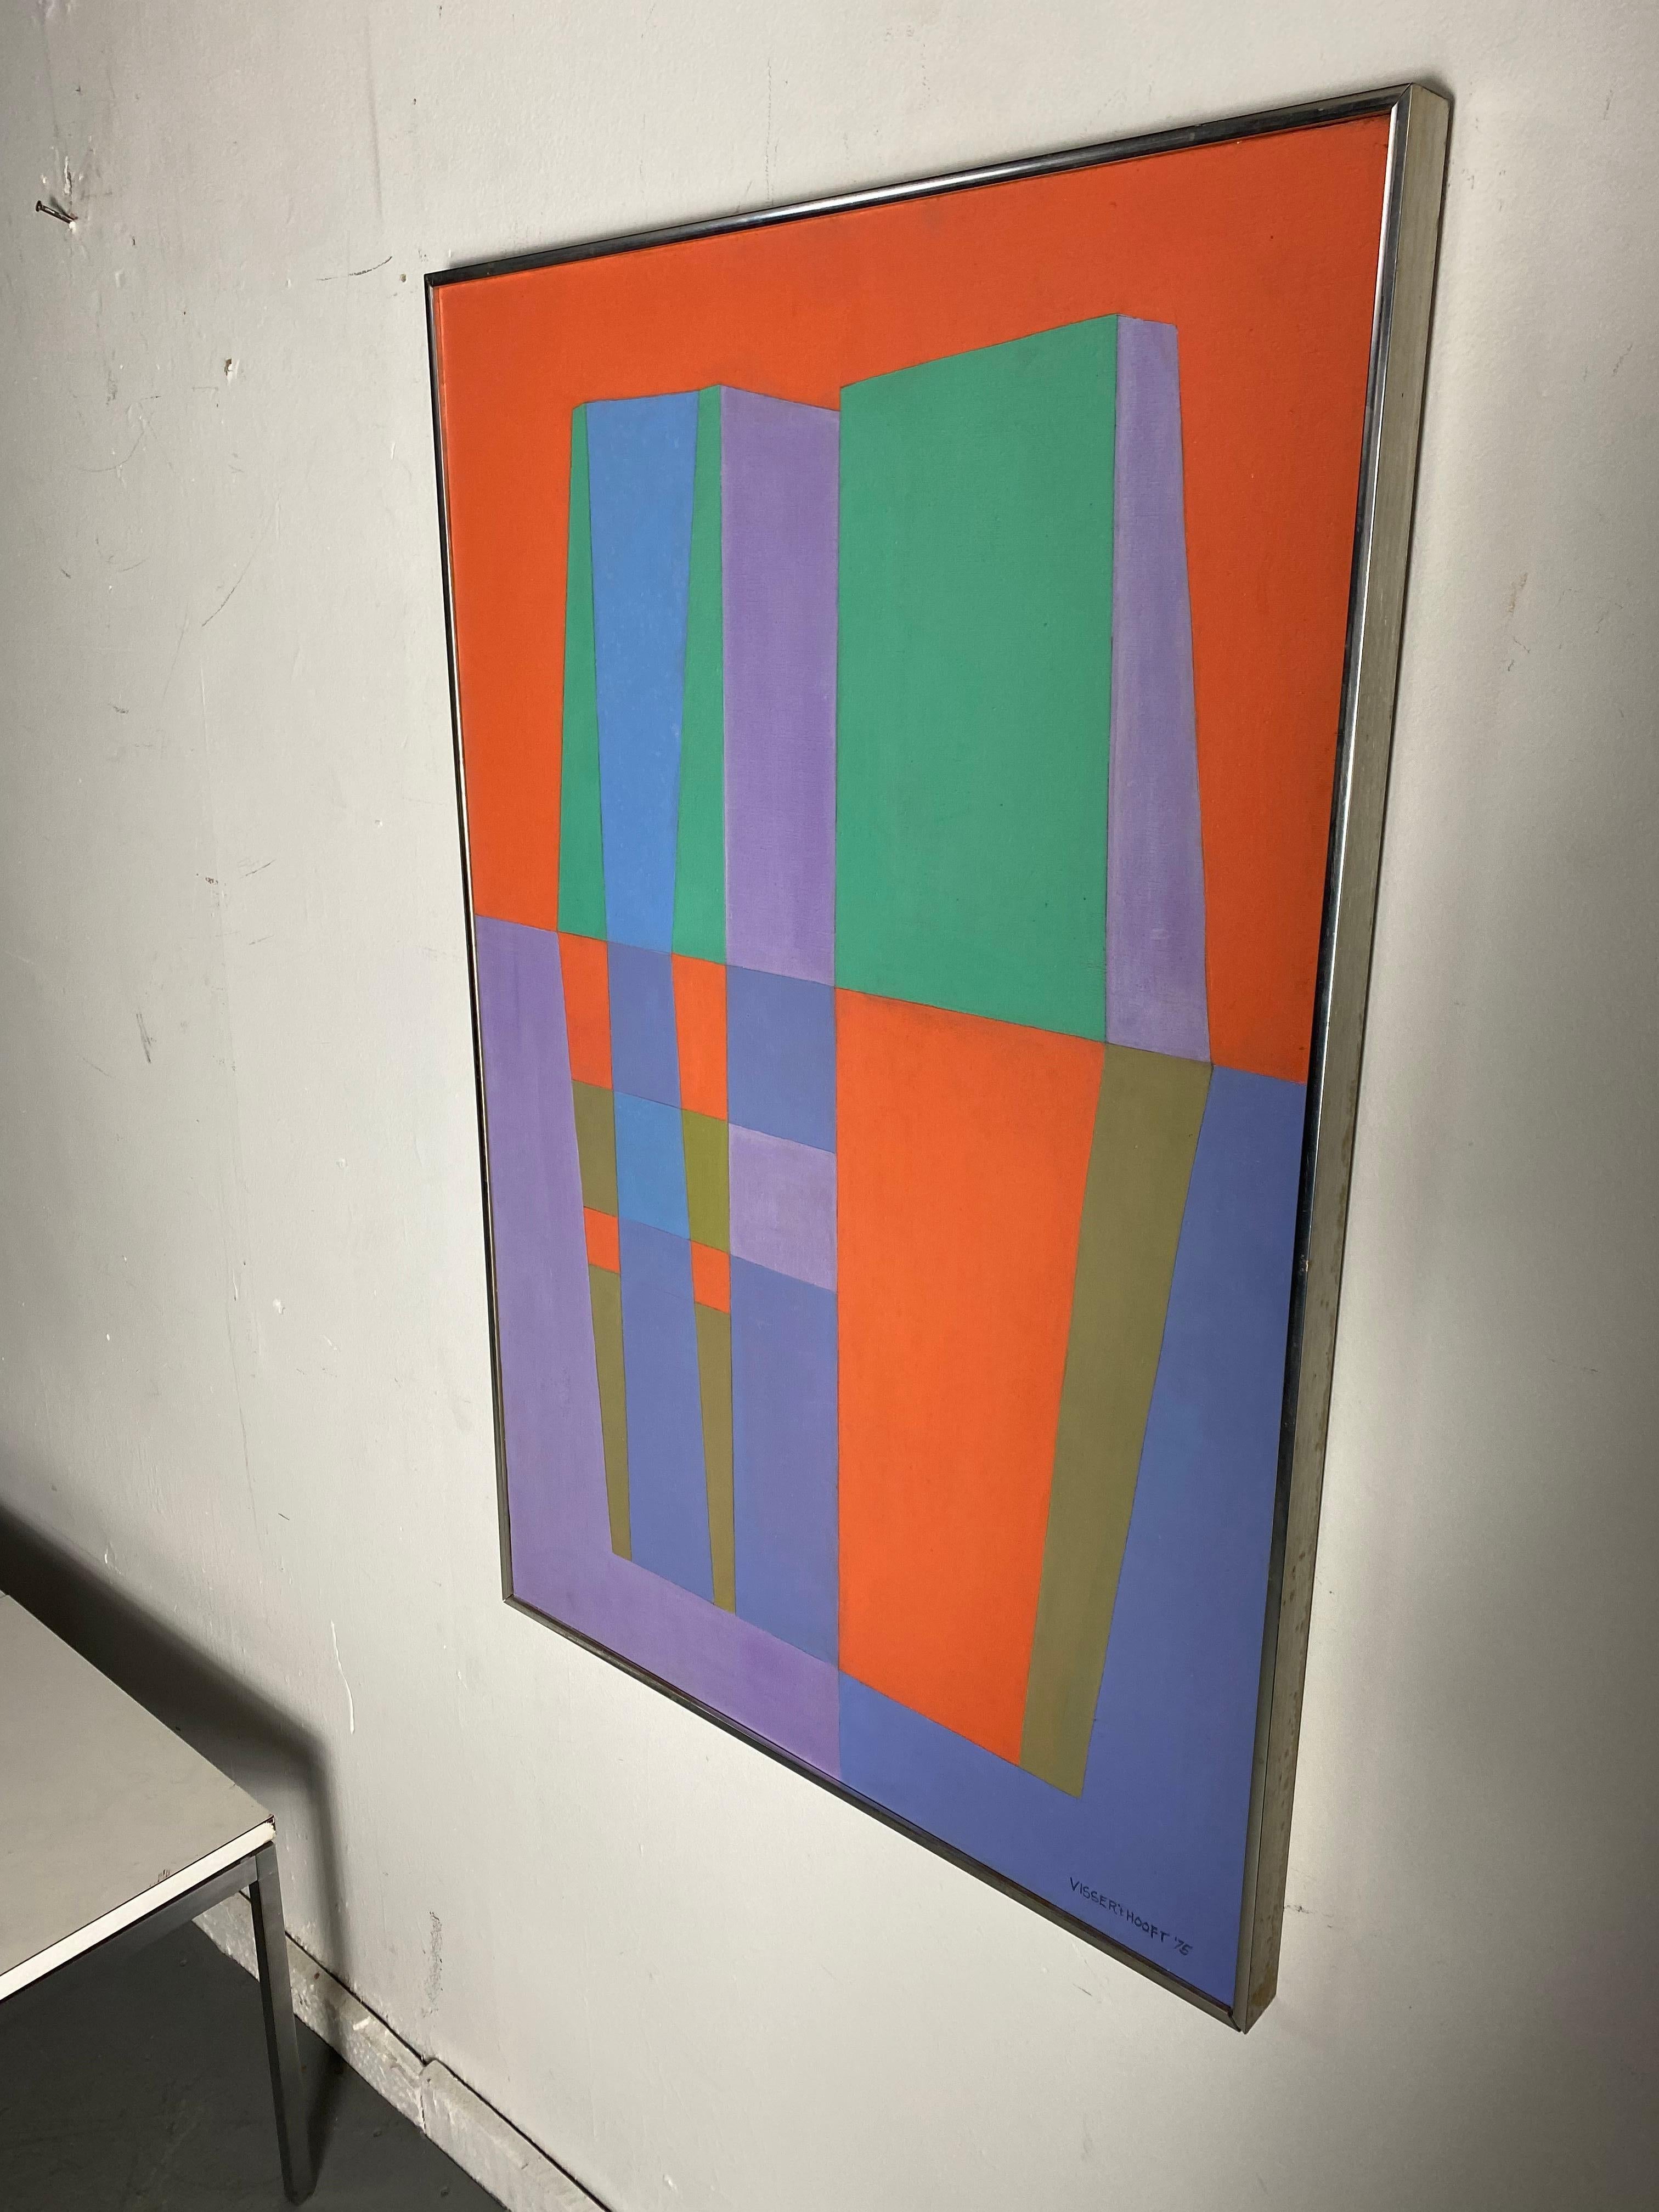 Modernist Abstract Oil on Canvas original painting by Martha Visser 't Hooft,,, Titled House of Meditation (Windows) c. 1975...Signed and dated,,,, . Stunning Image ,, colors,,, 
 
Martha Hamlin Visser't Hooft was an artist and teacher whose